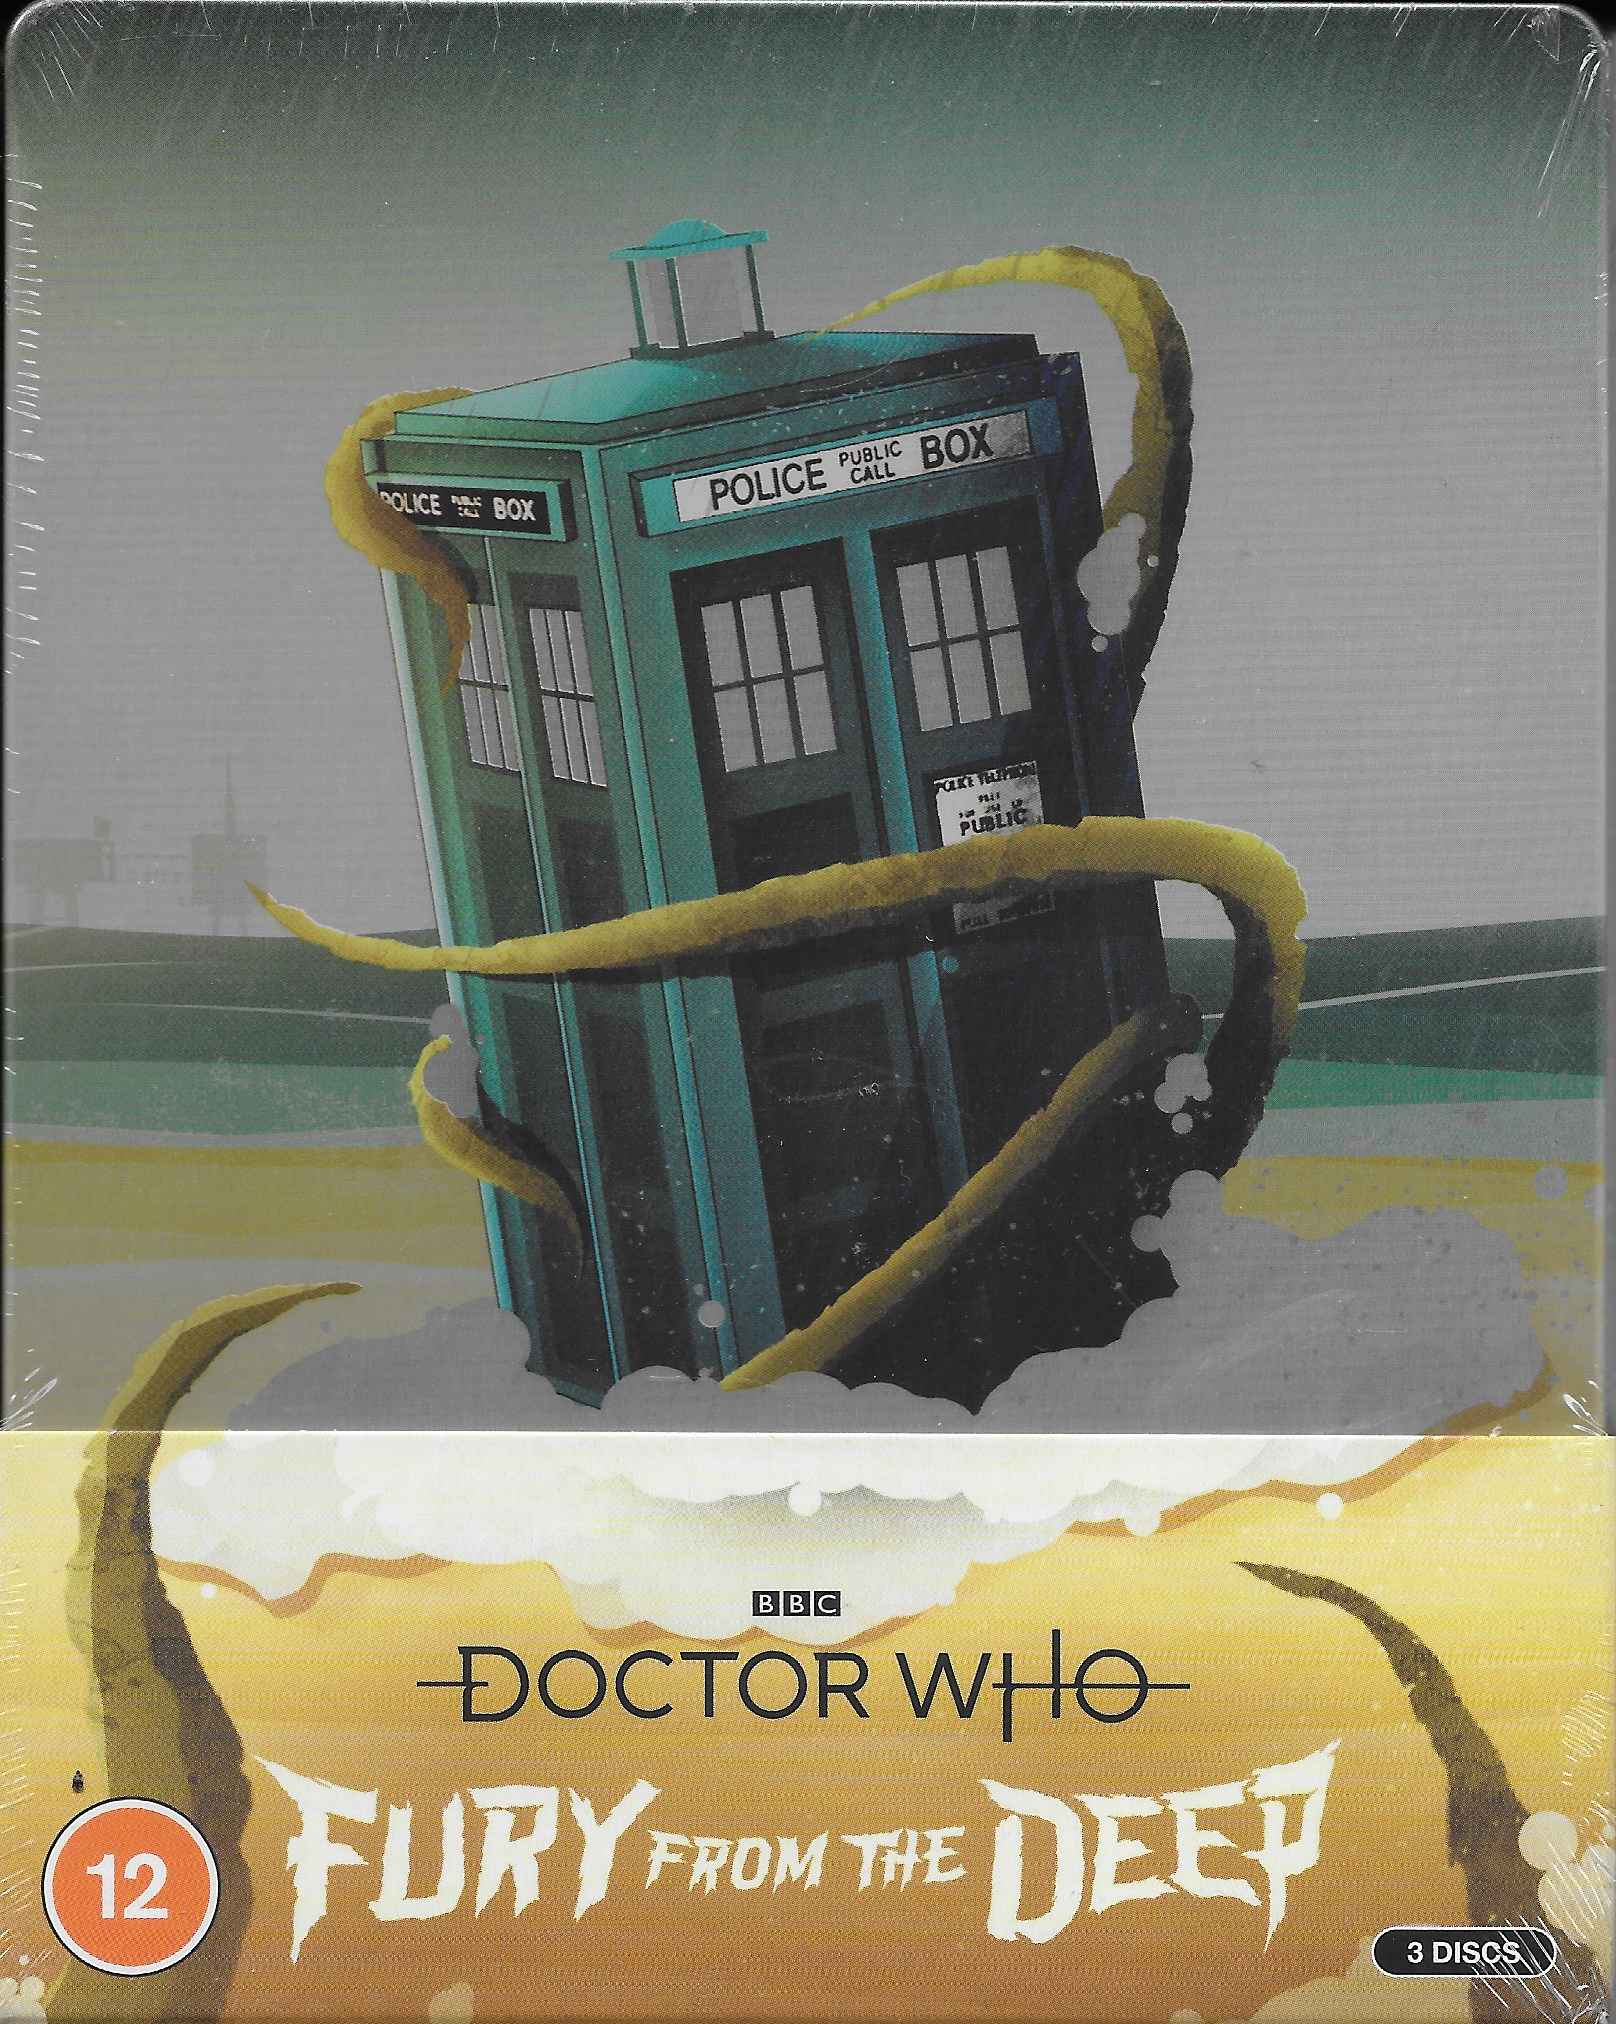 Picture of BBCBD 0500 Doctor Who - Fury from the deep by artist Victor Pemberton from the BBC blu-rays - Records and Tapes library